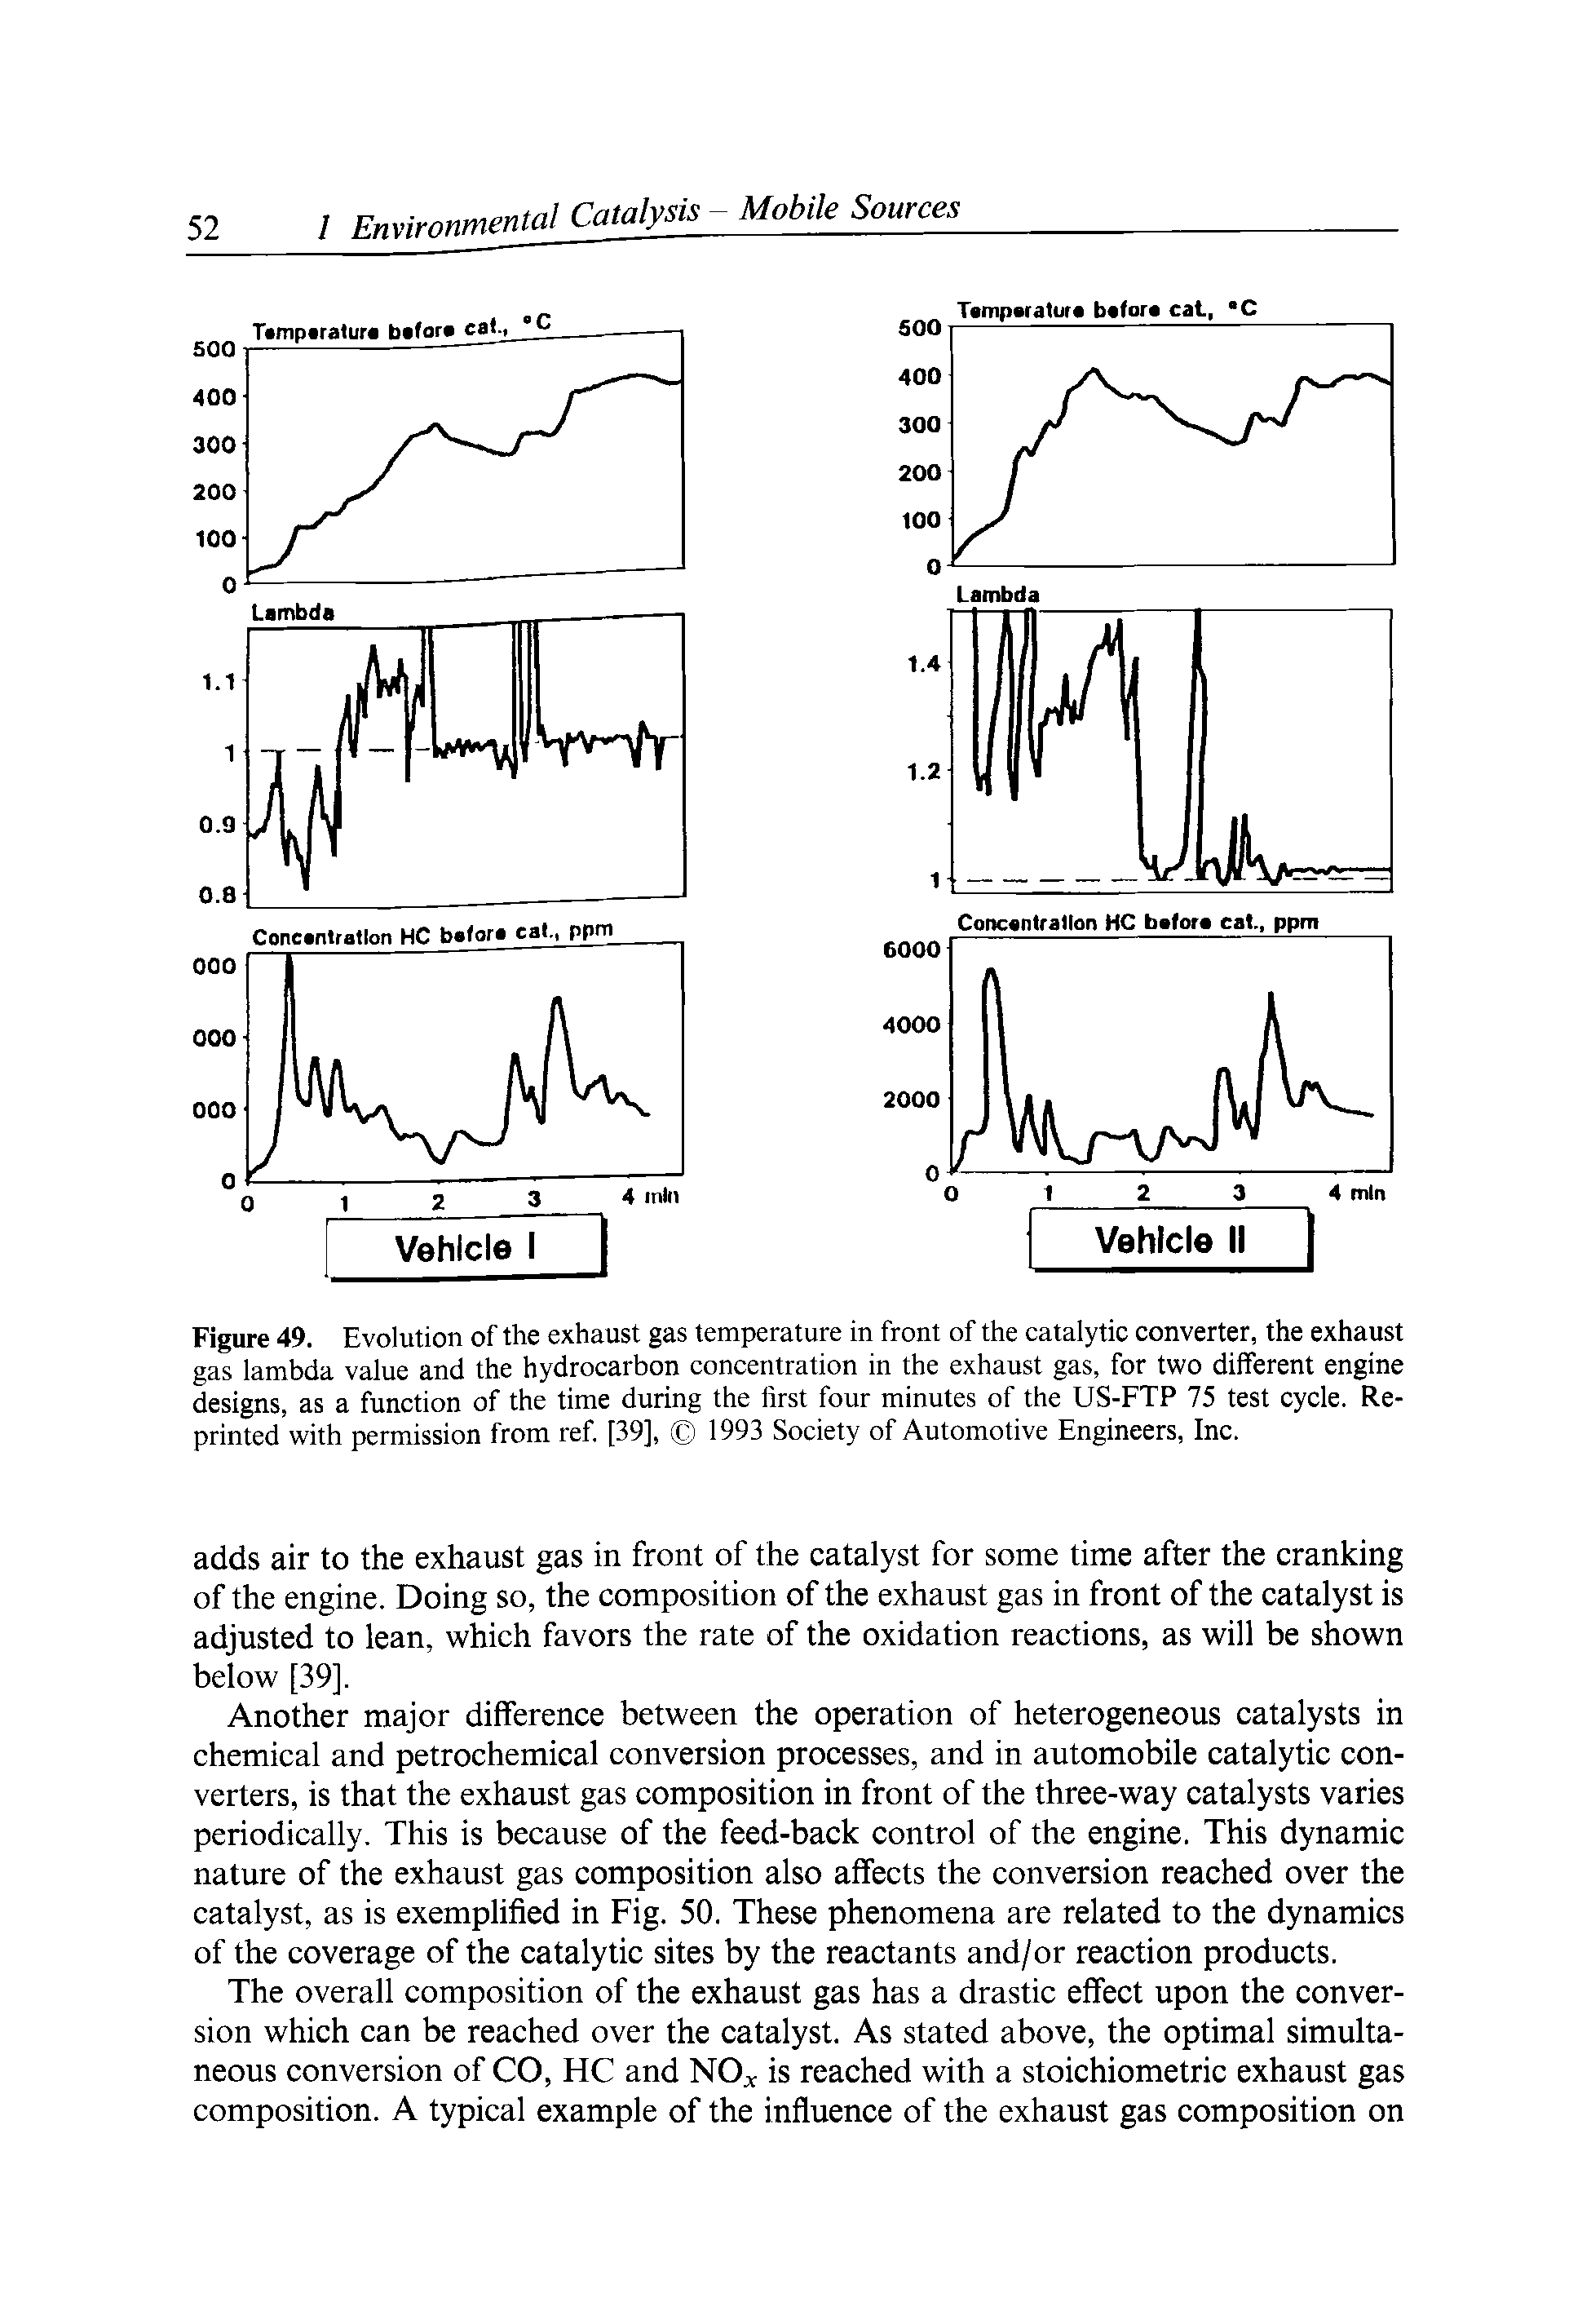 Figure 49. Evolution of the exhaust gas temperature in front of the catalytic converter, the exhaust gas lambda value and the hydrocarbon concentration in the exhaust gas, for two different engine designs, as a function of the time during the first four minutes of the US-FTP 75 test cycle. Reprinted with permission from ref. [39], 1993 Society of Automotive Engineers, Inc.